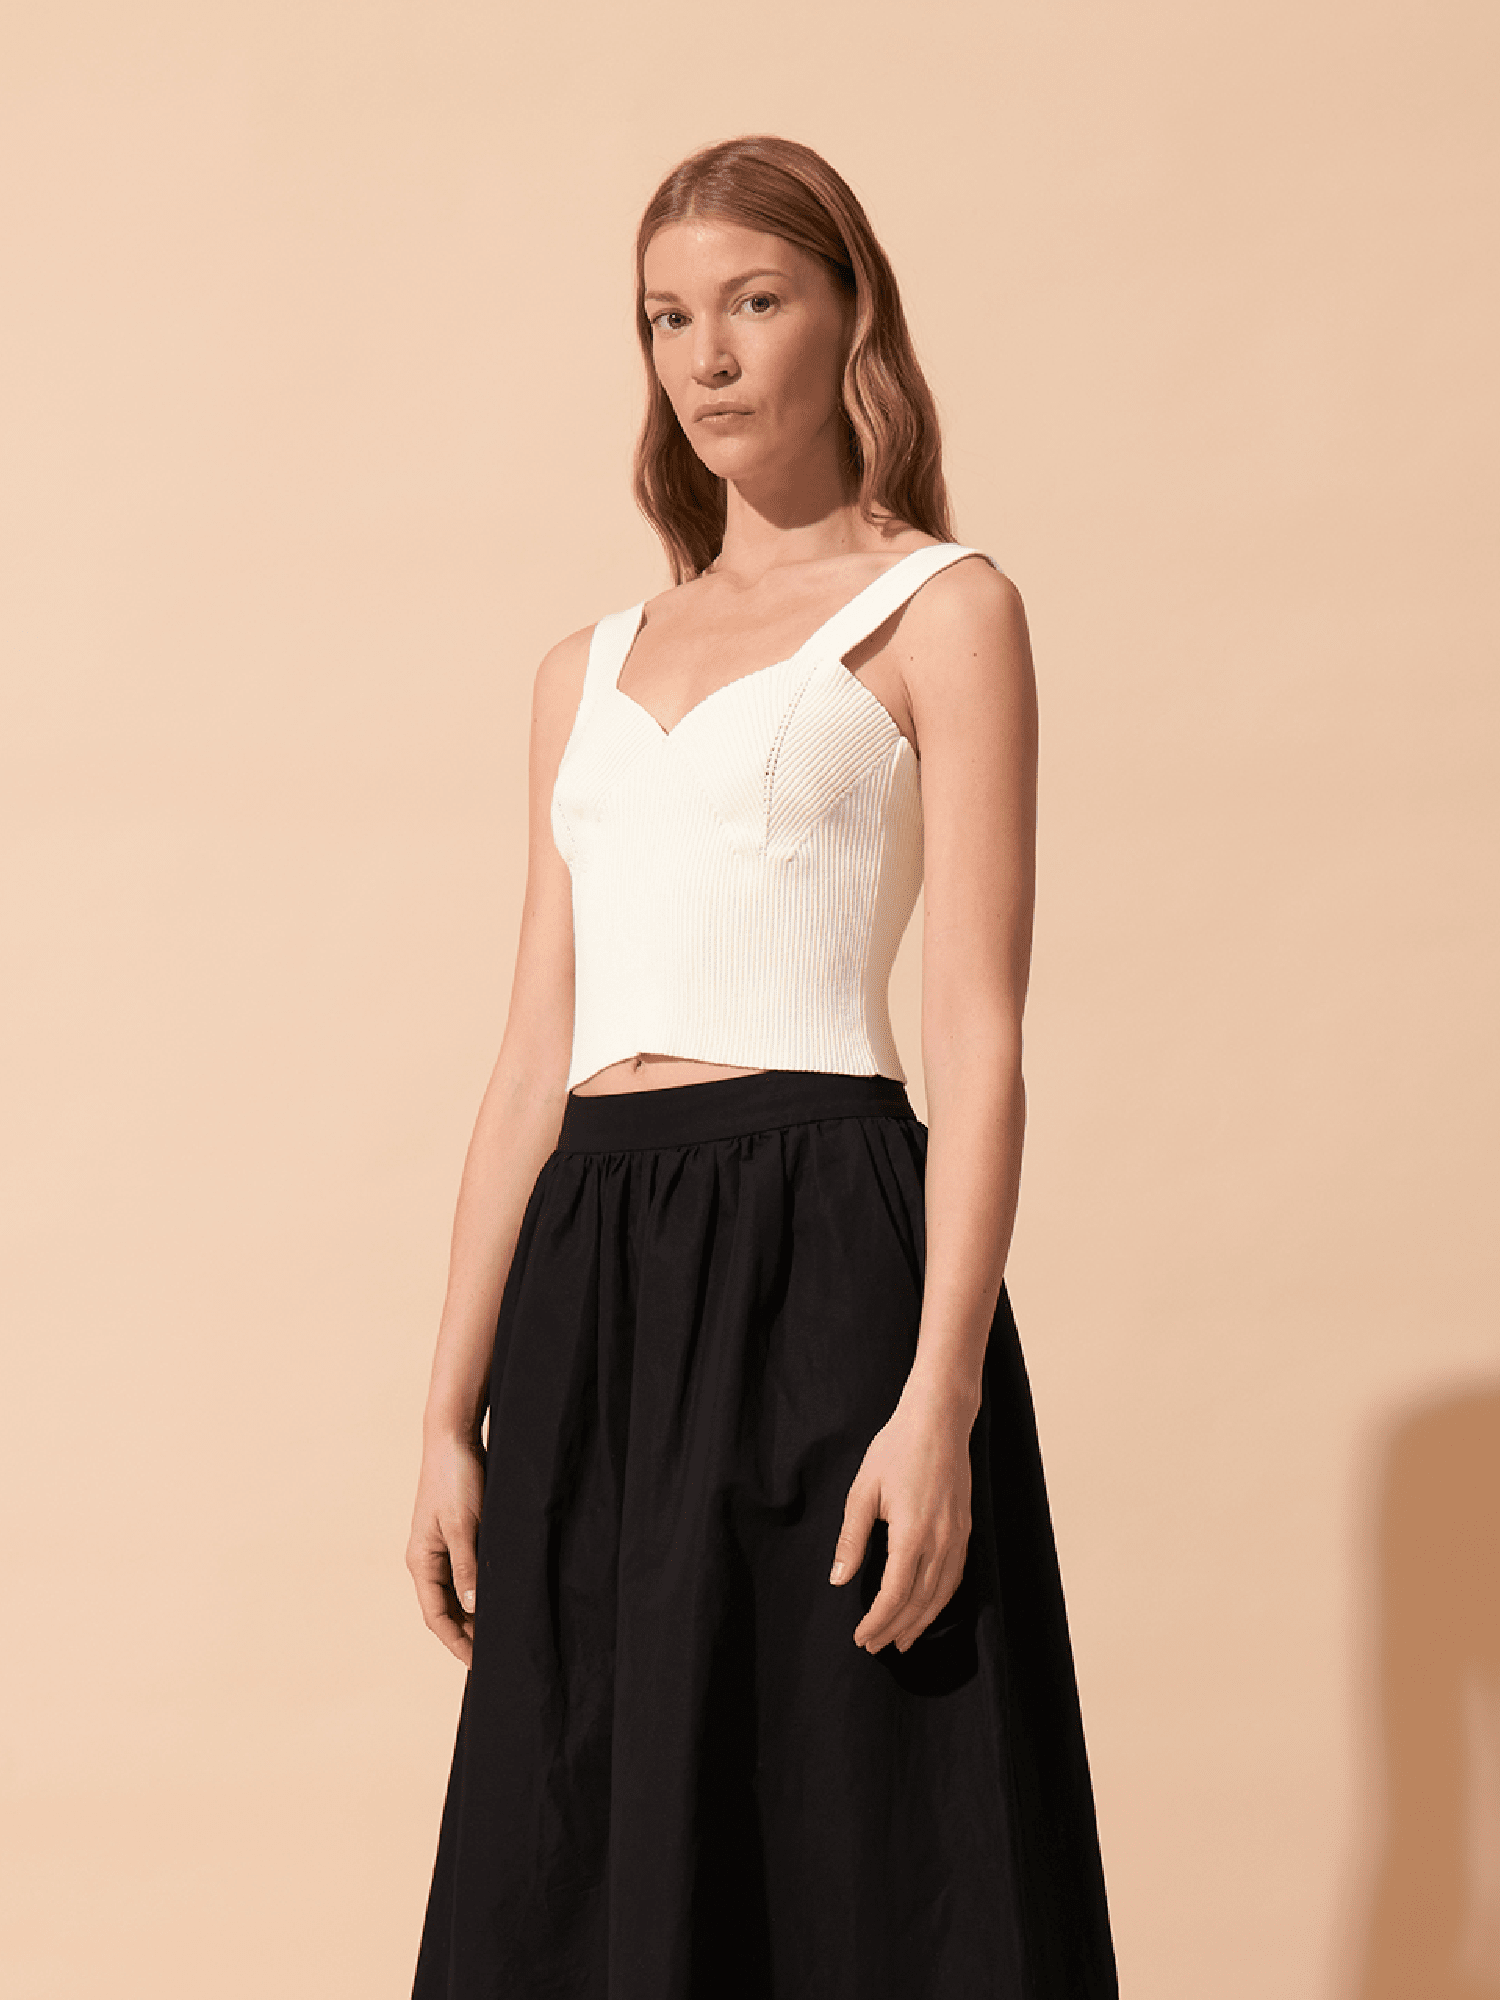 JACKIE - Oeko-Tex Ecru rib knit top with wide straps and low-cut back Top Fête Impériale